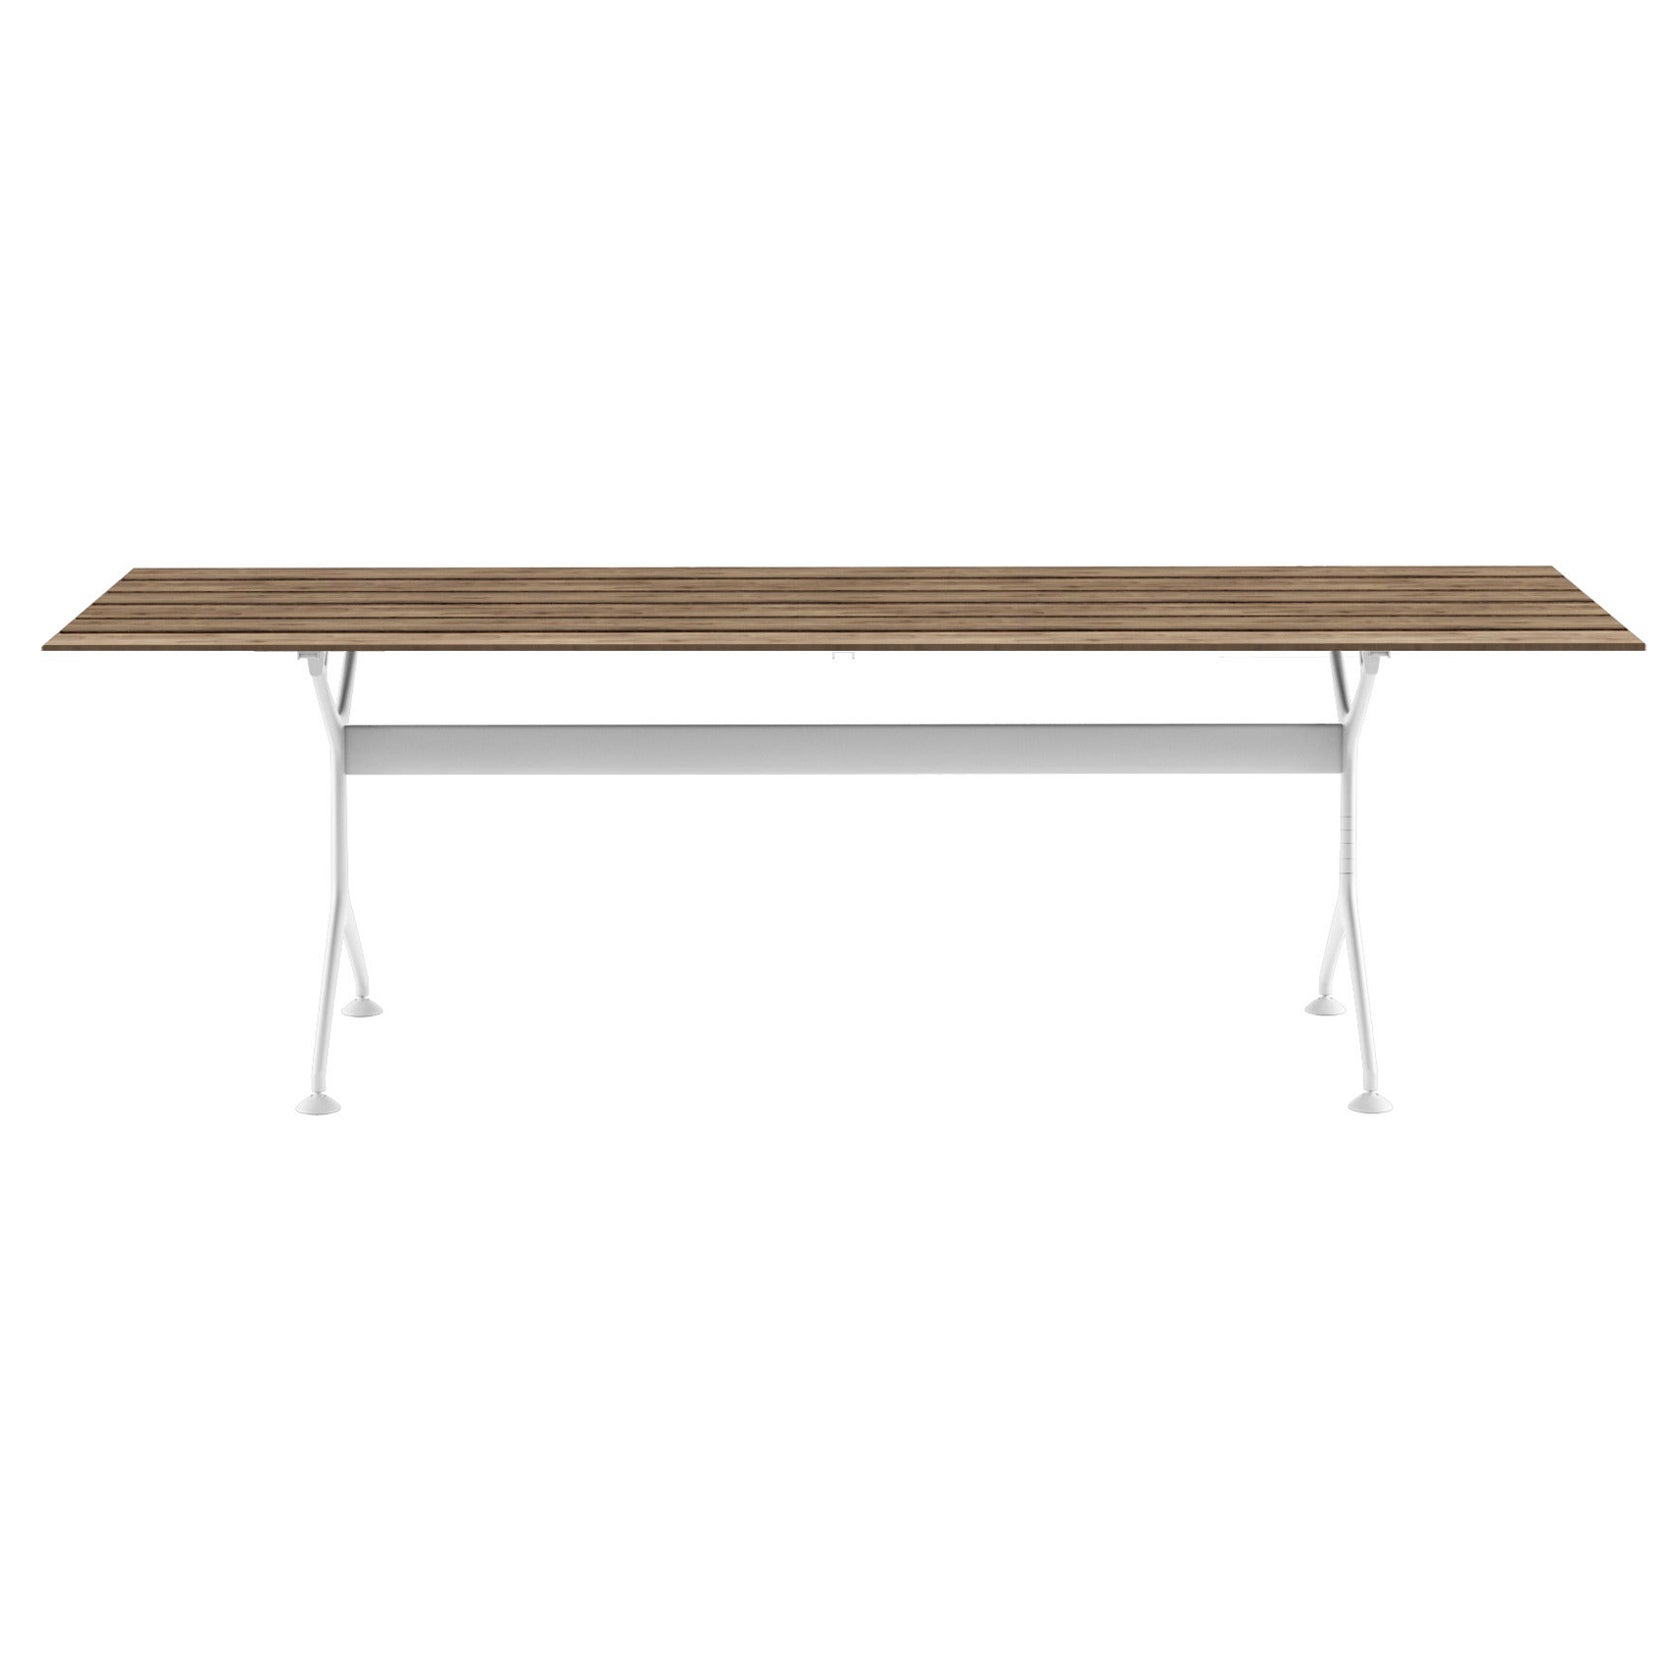 Alias M24 Tech Wood Outdoor Table 240 in Ash and Lacquered Aluminium Frame For Sale